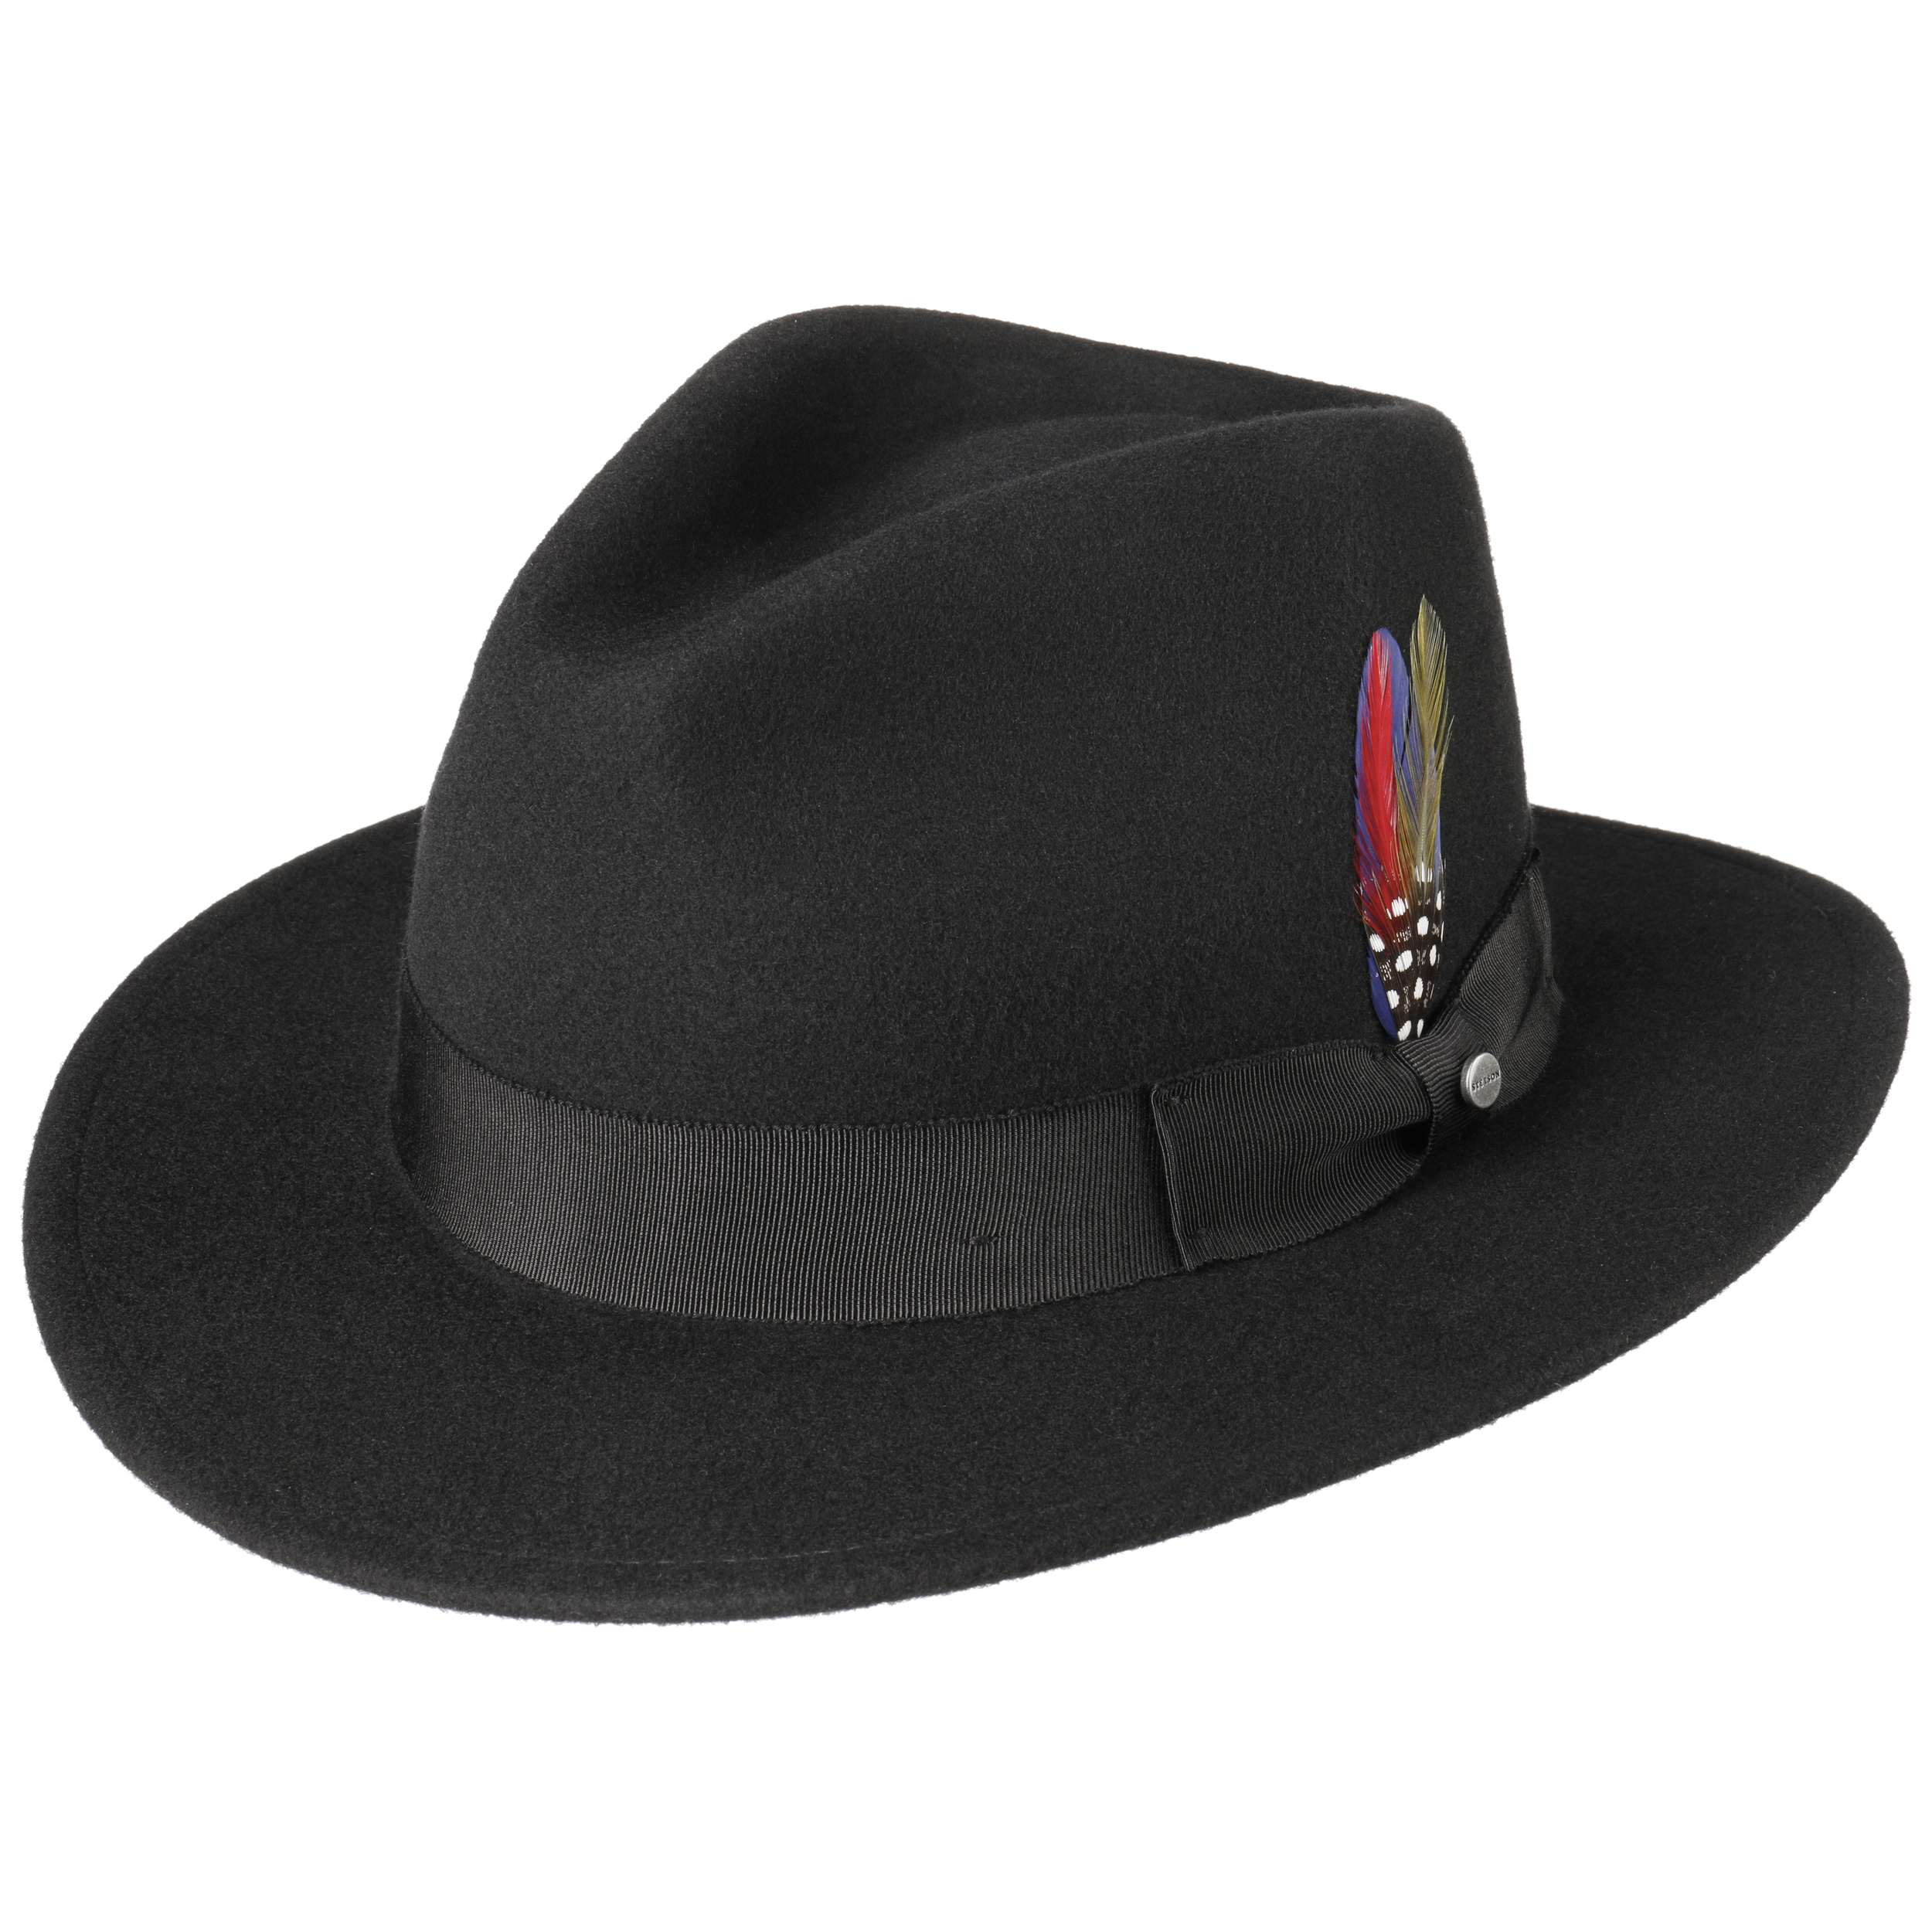 Viconti Traveller Wool Hat by Stetson - 129,00